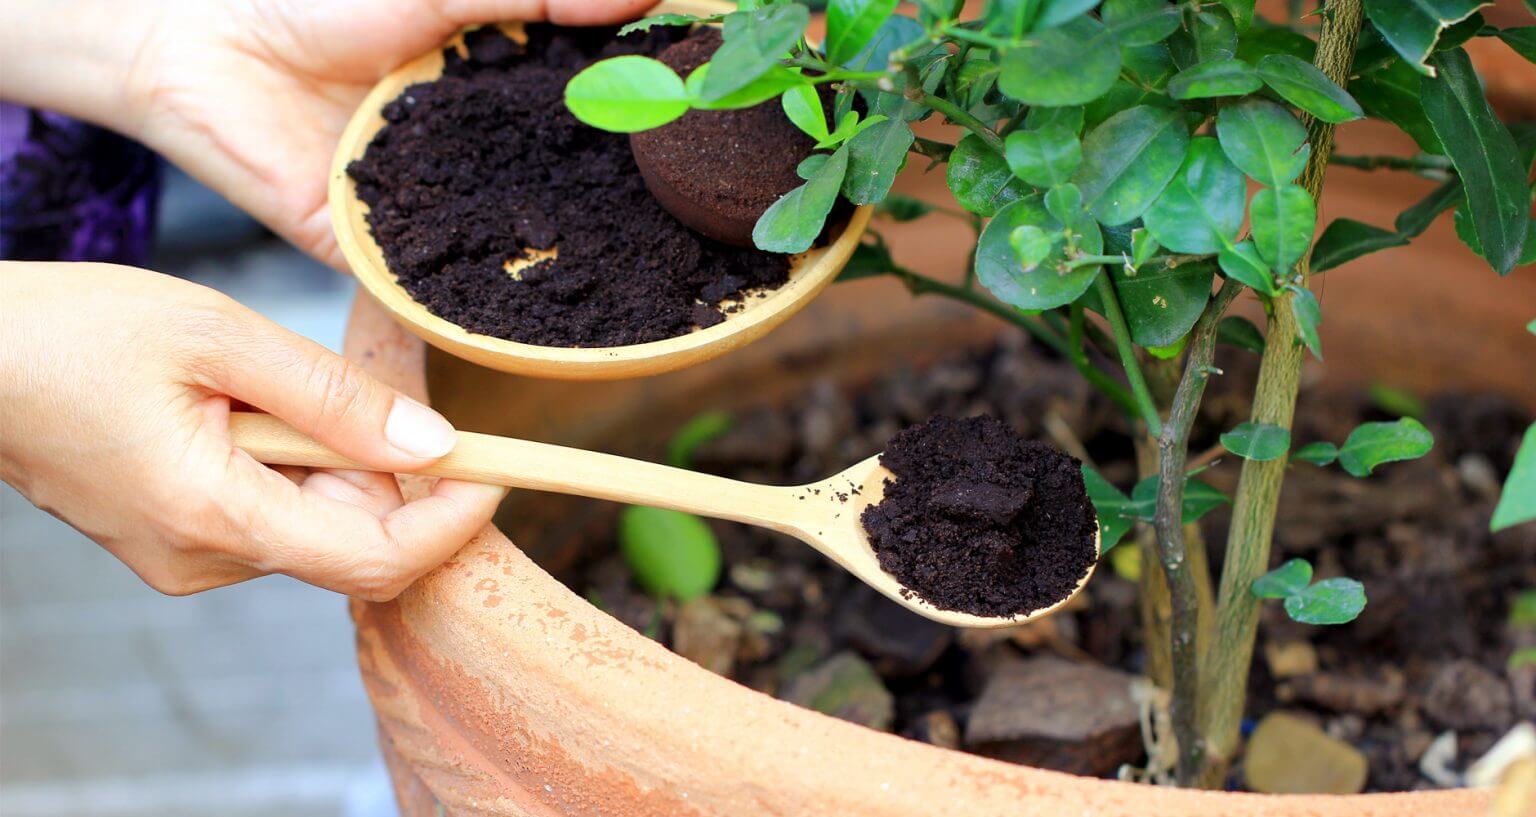 Mixing coffee grounds with the soil